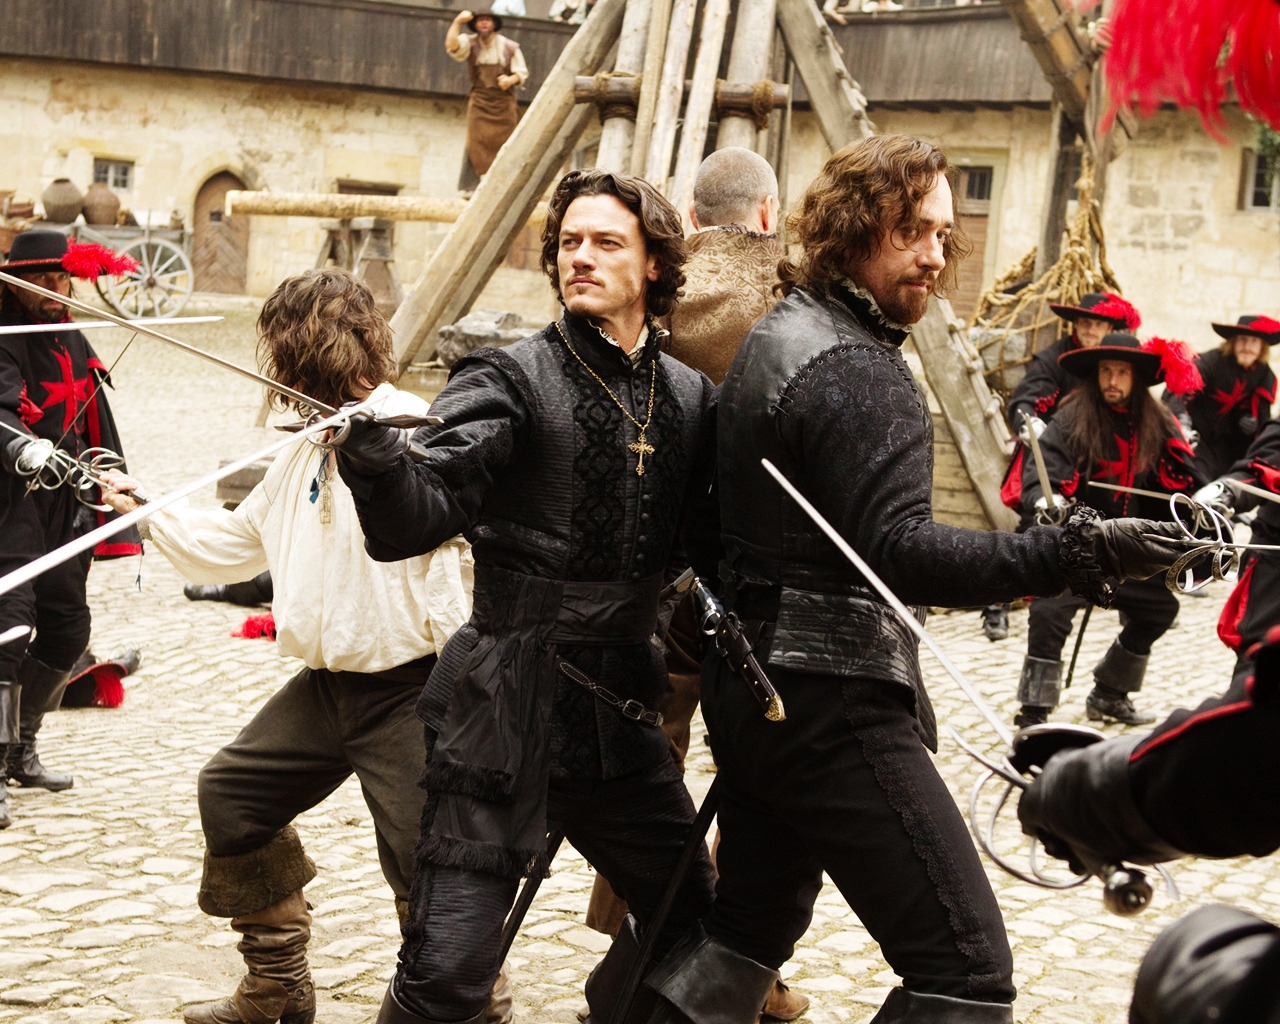 The Three Musketeers Movie for 1280 x 1024 resolution